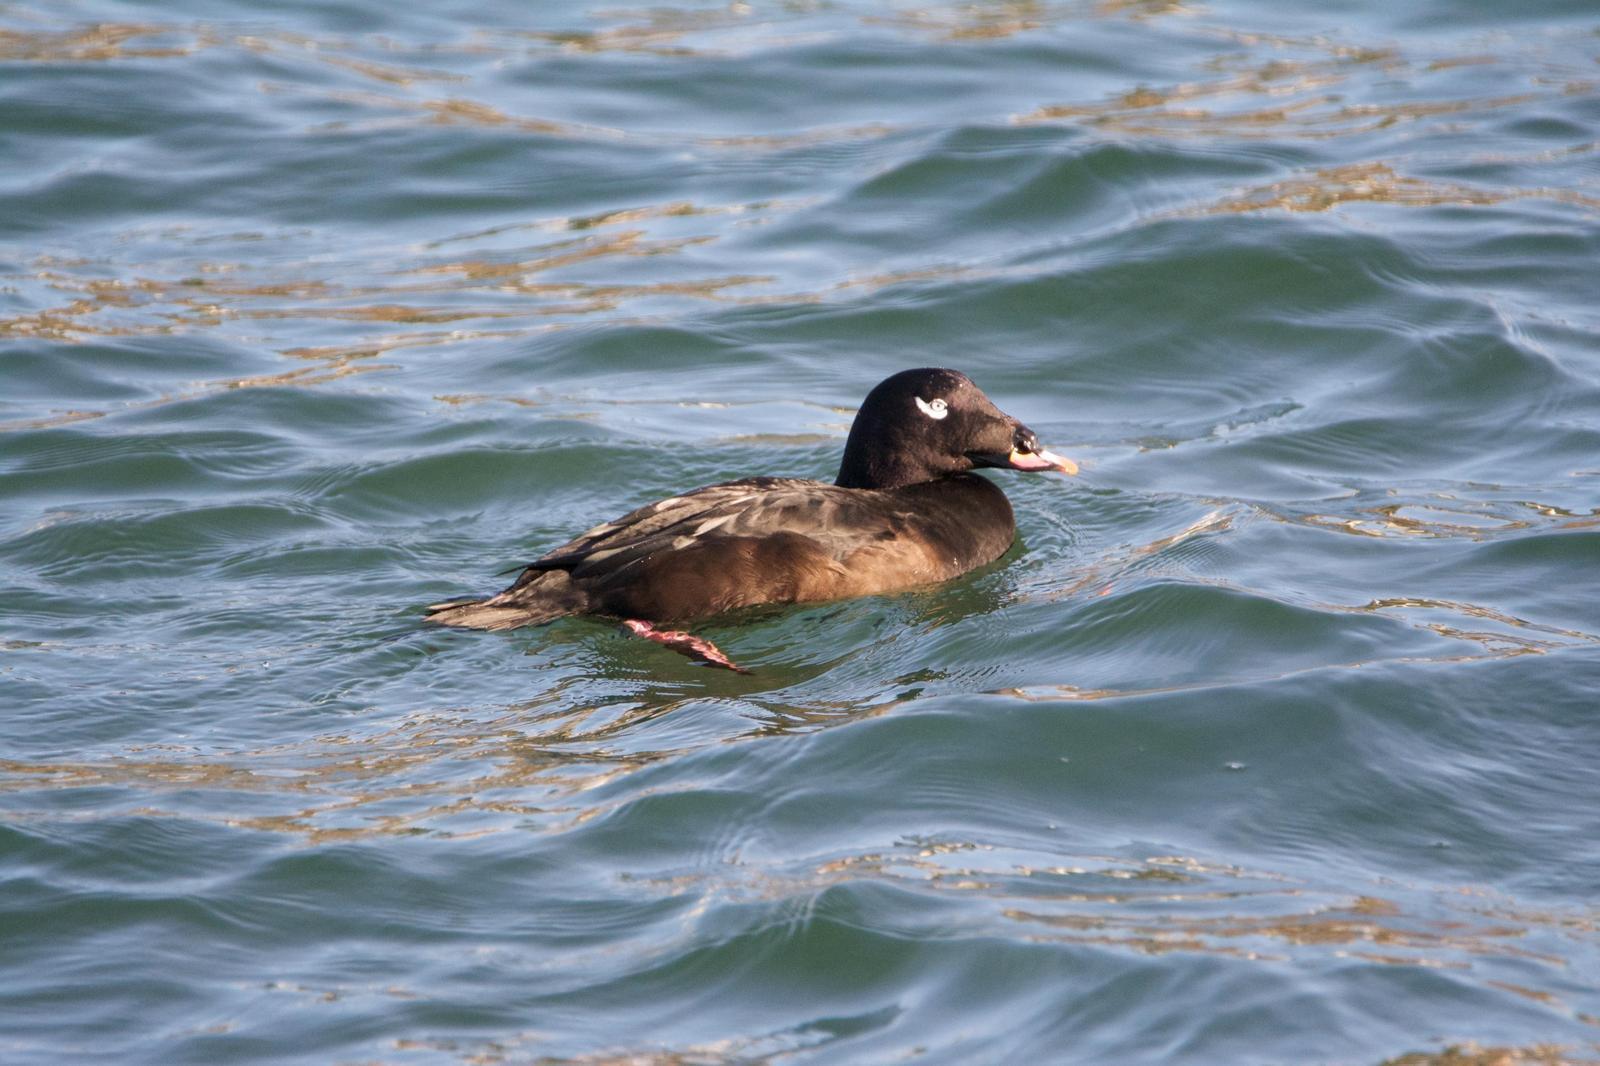 White-winged Scoter (North American) Photo by Brian Avent